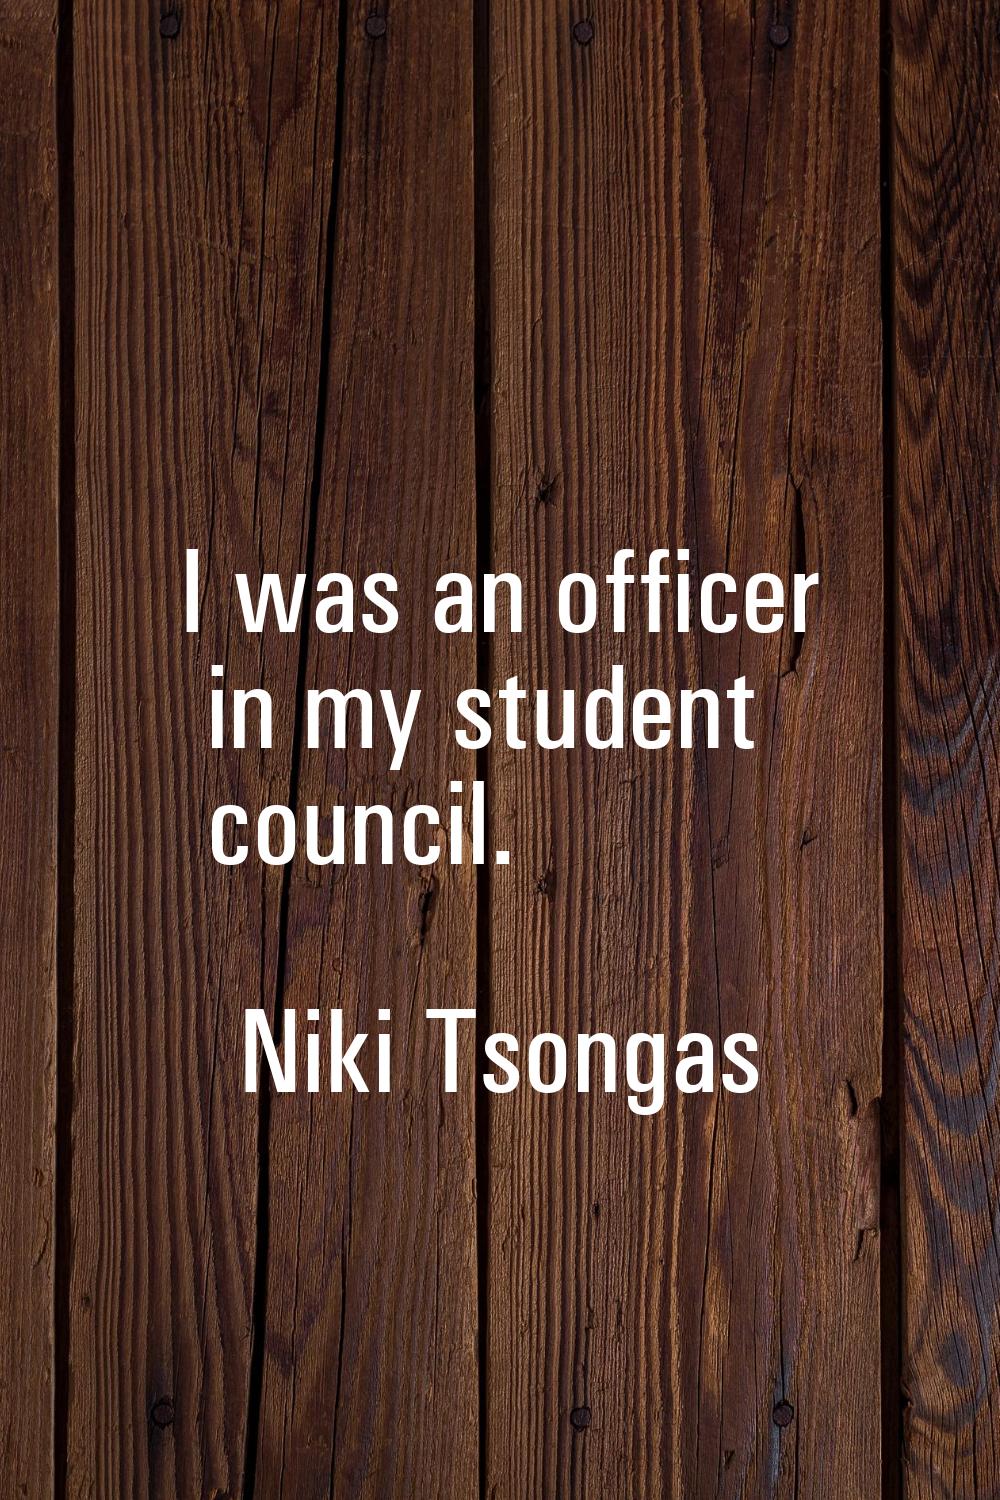 I was an officer in my student council.